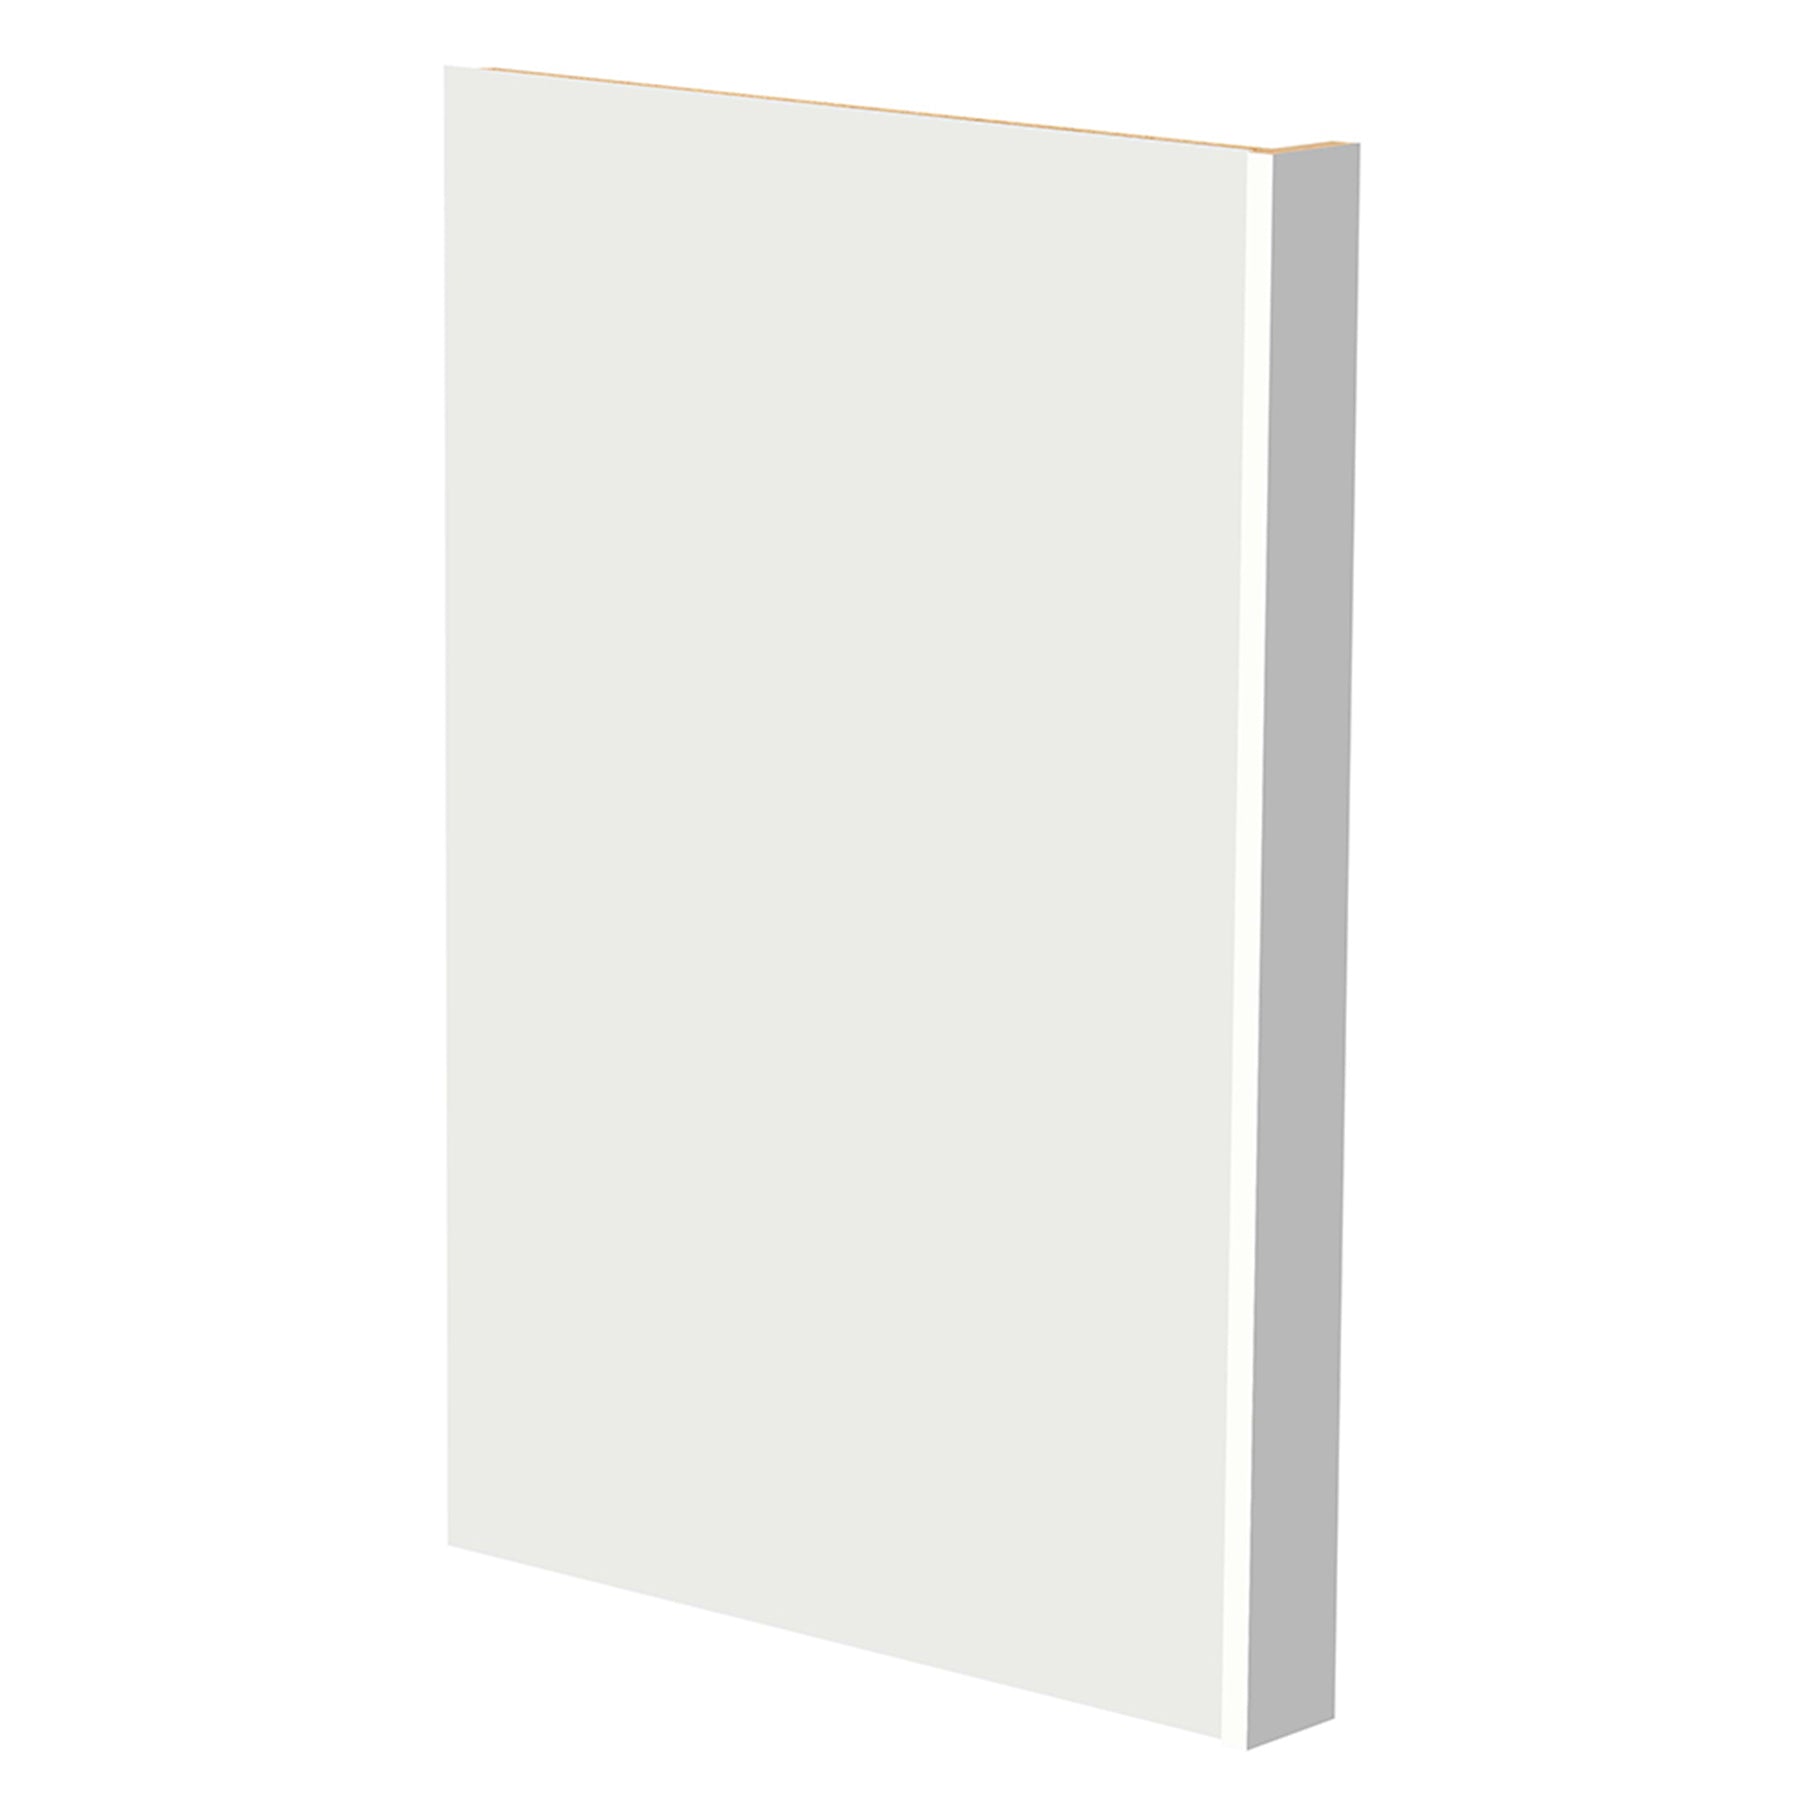 End Panel Faced with 3 Inch stile - 1/2 Inch x 24 Inch x 34-1/2 Inch - Dwhite Shaker - Kitchen Cabinet